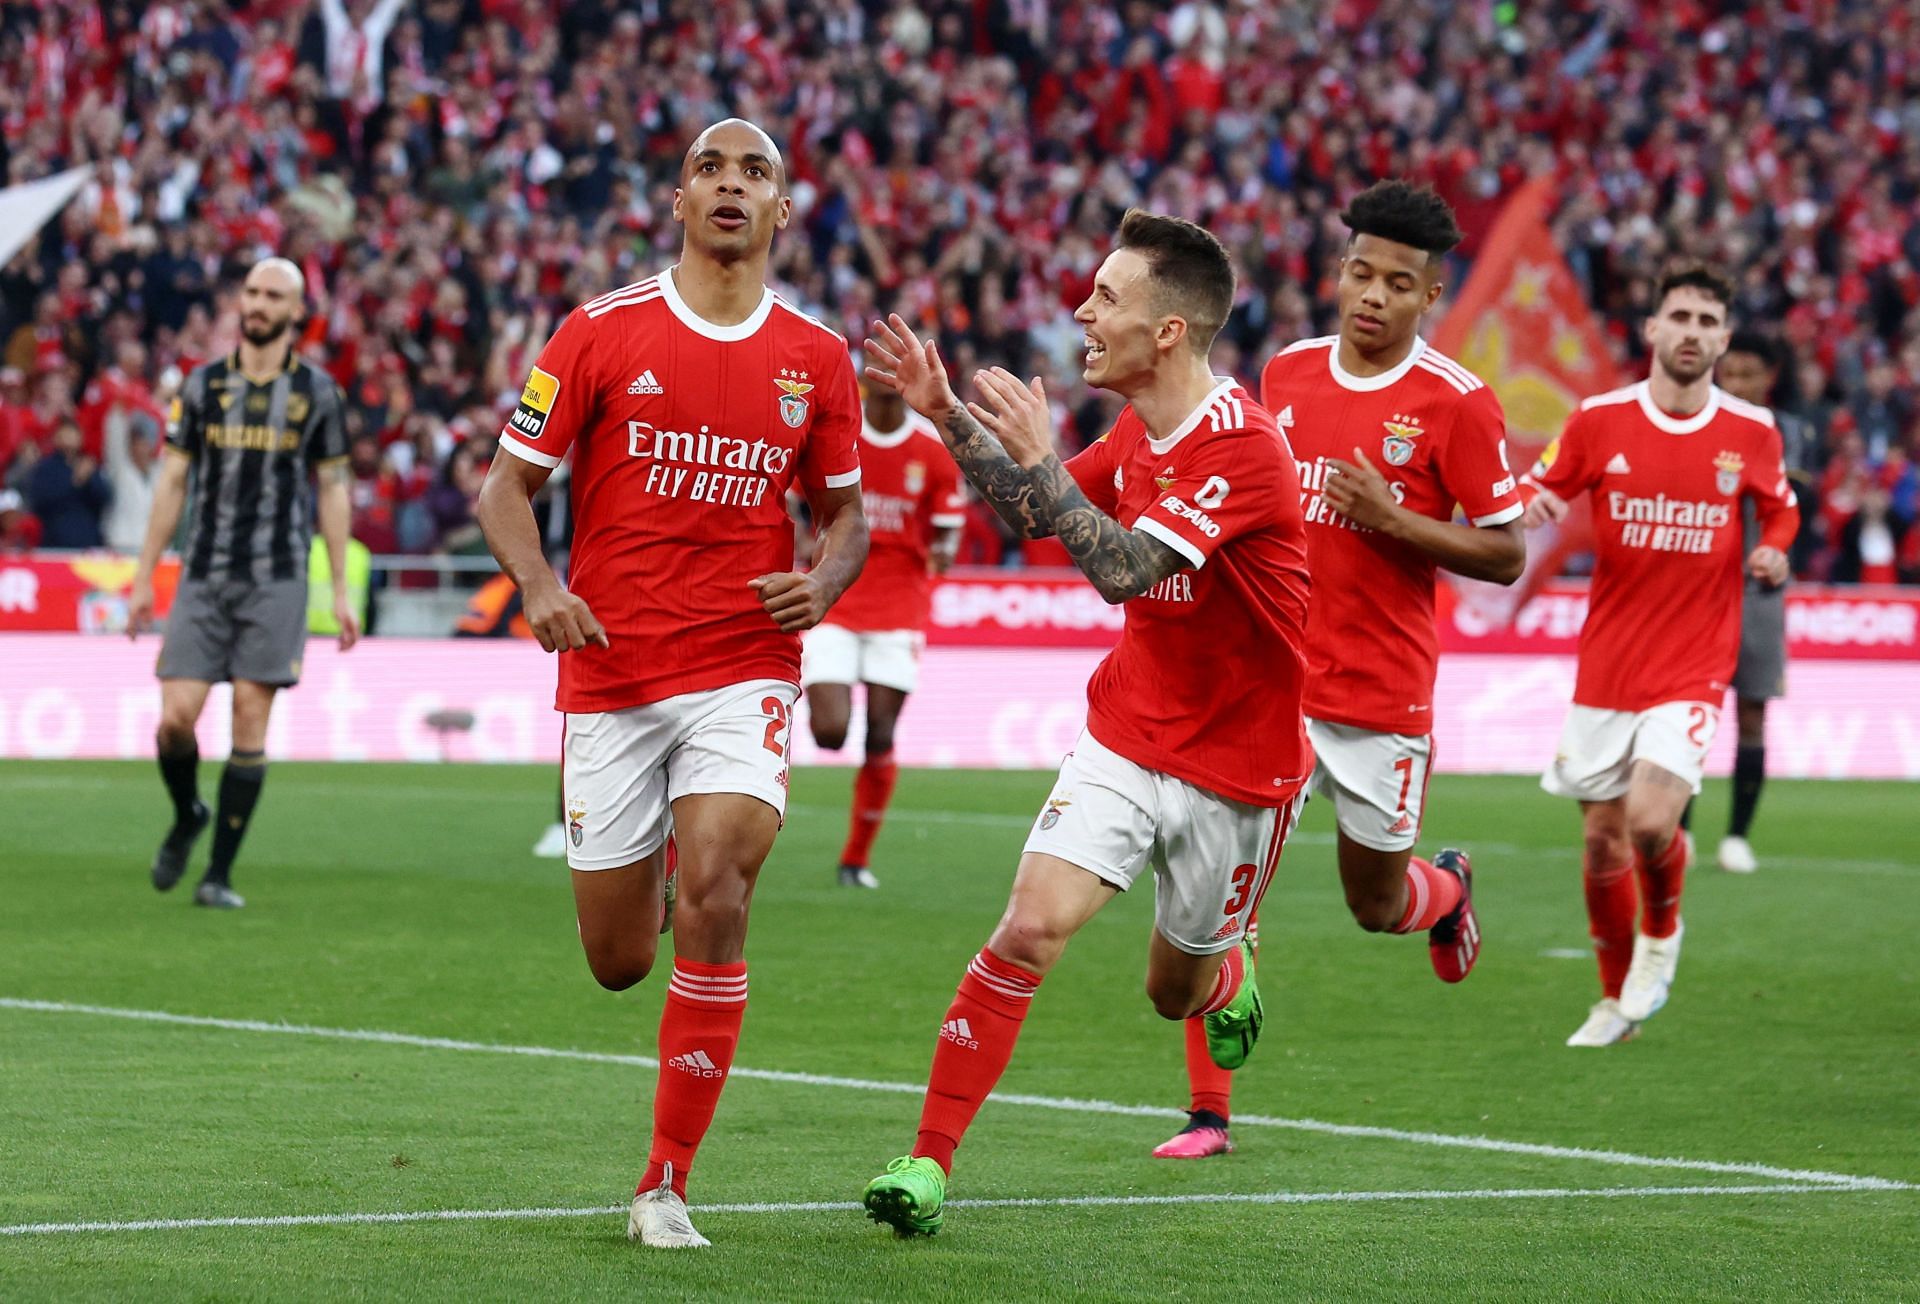 Chaves are looking to win consecutively to Benfica for the first time 